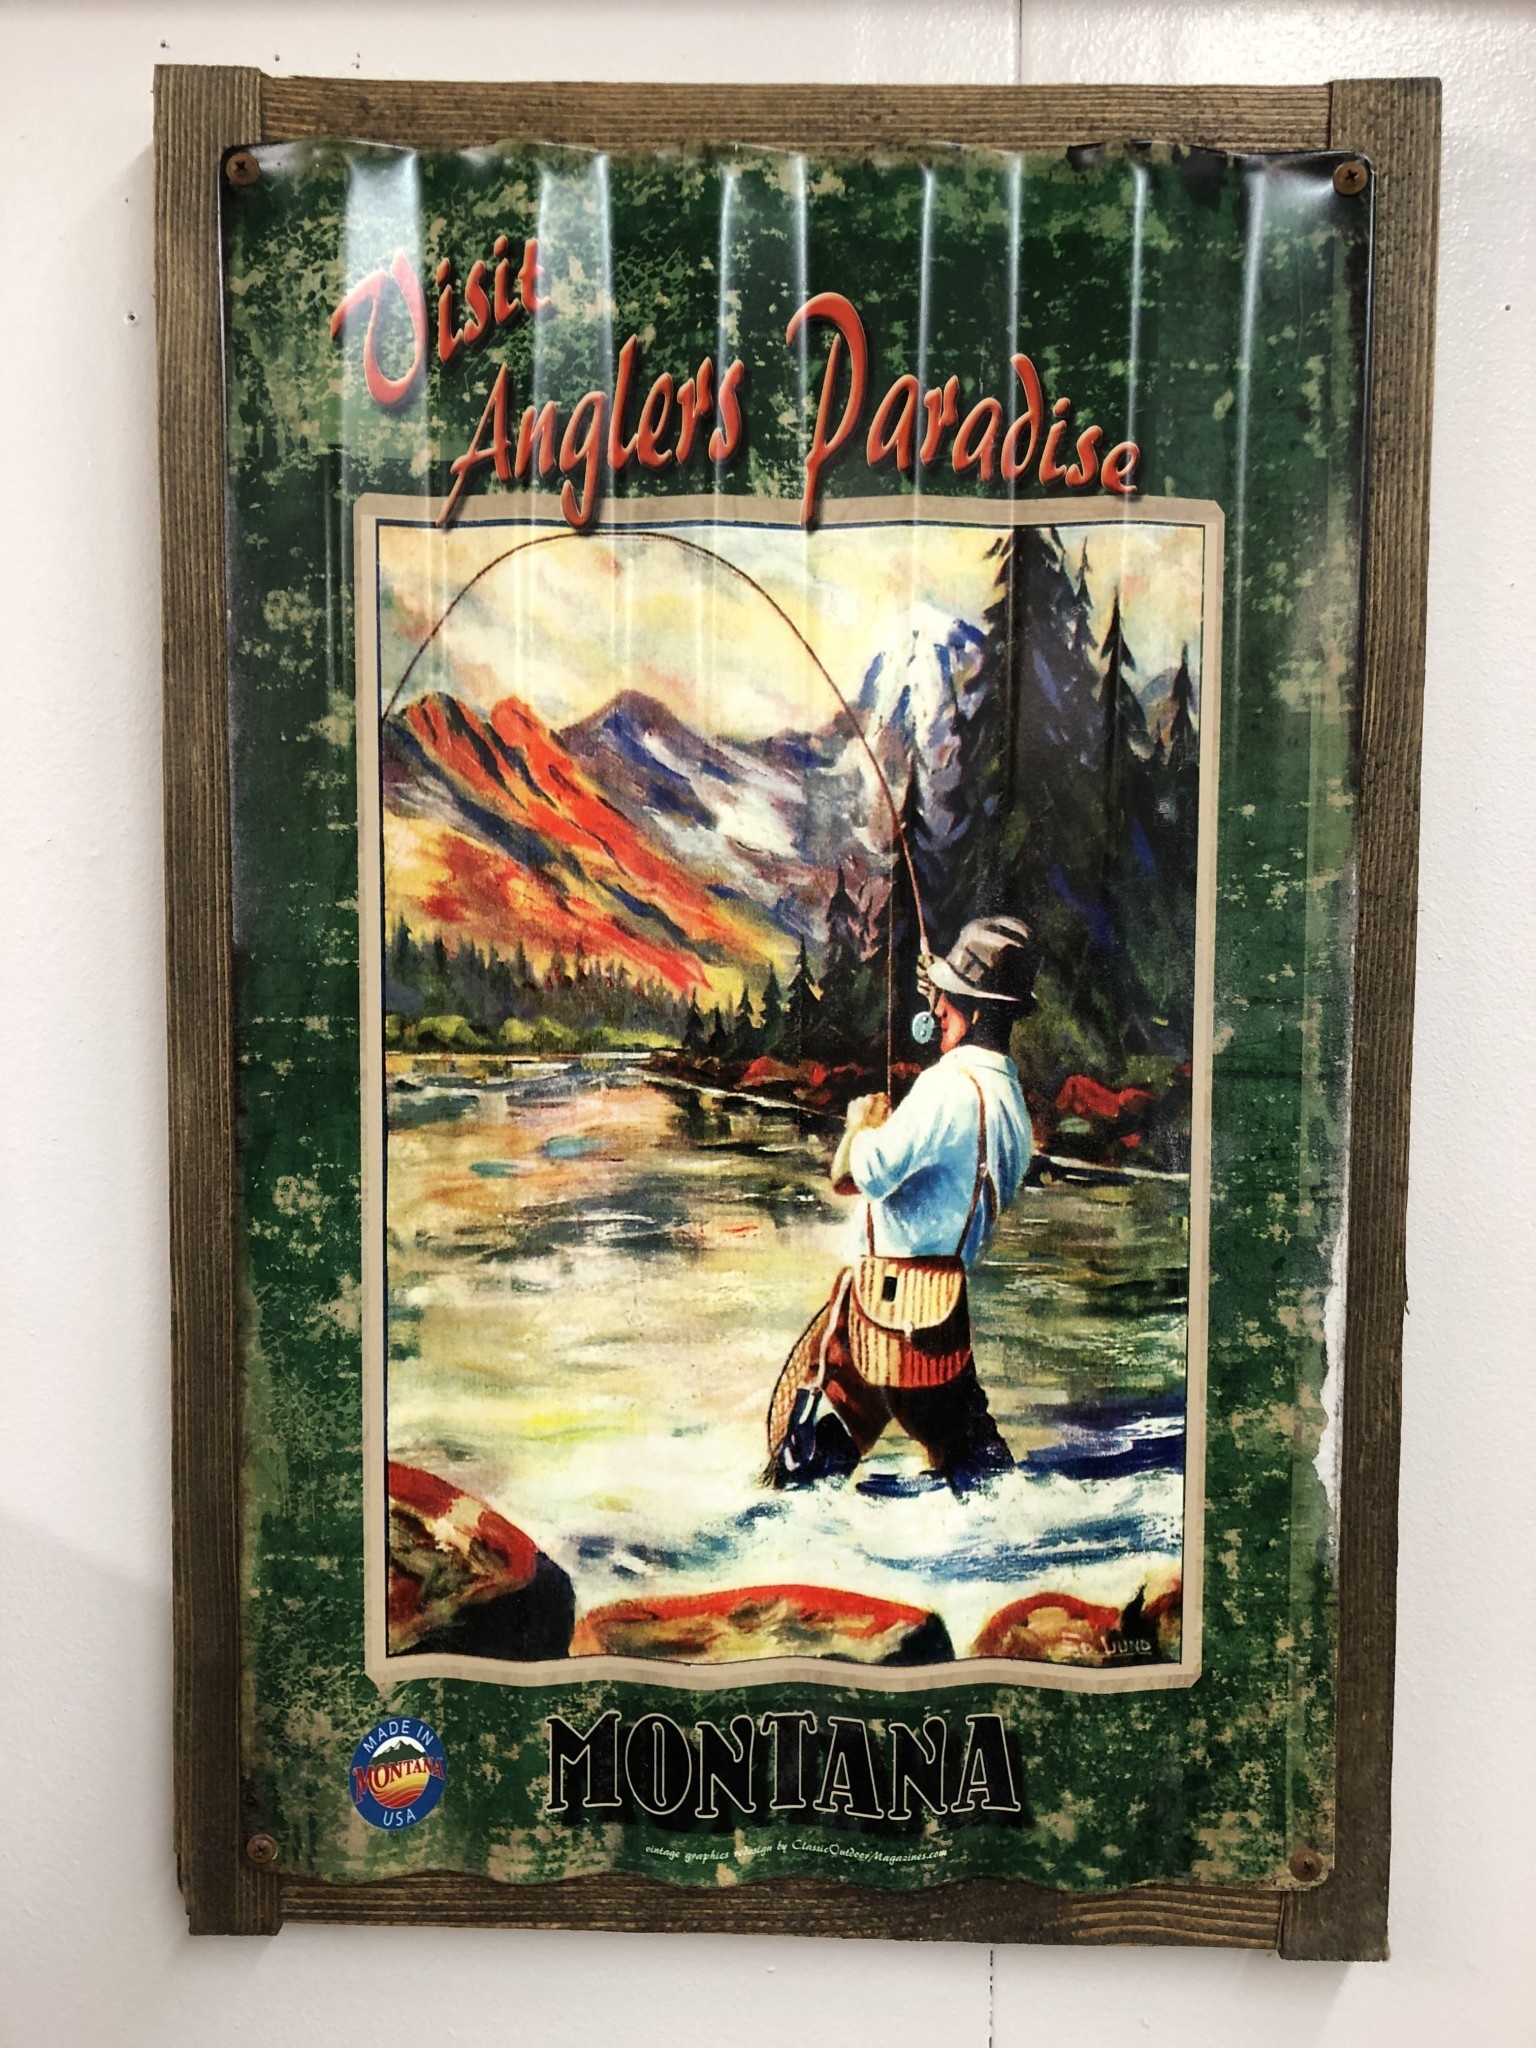 Classic Outdoor Magazines #3  Angler Paradise 16x24 Corrugated Metal/Wood